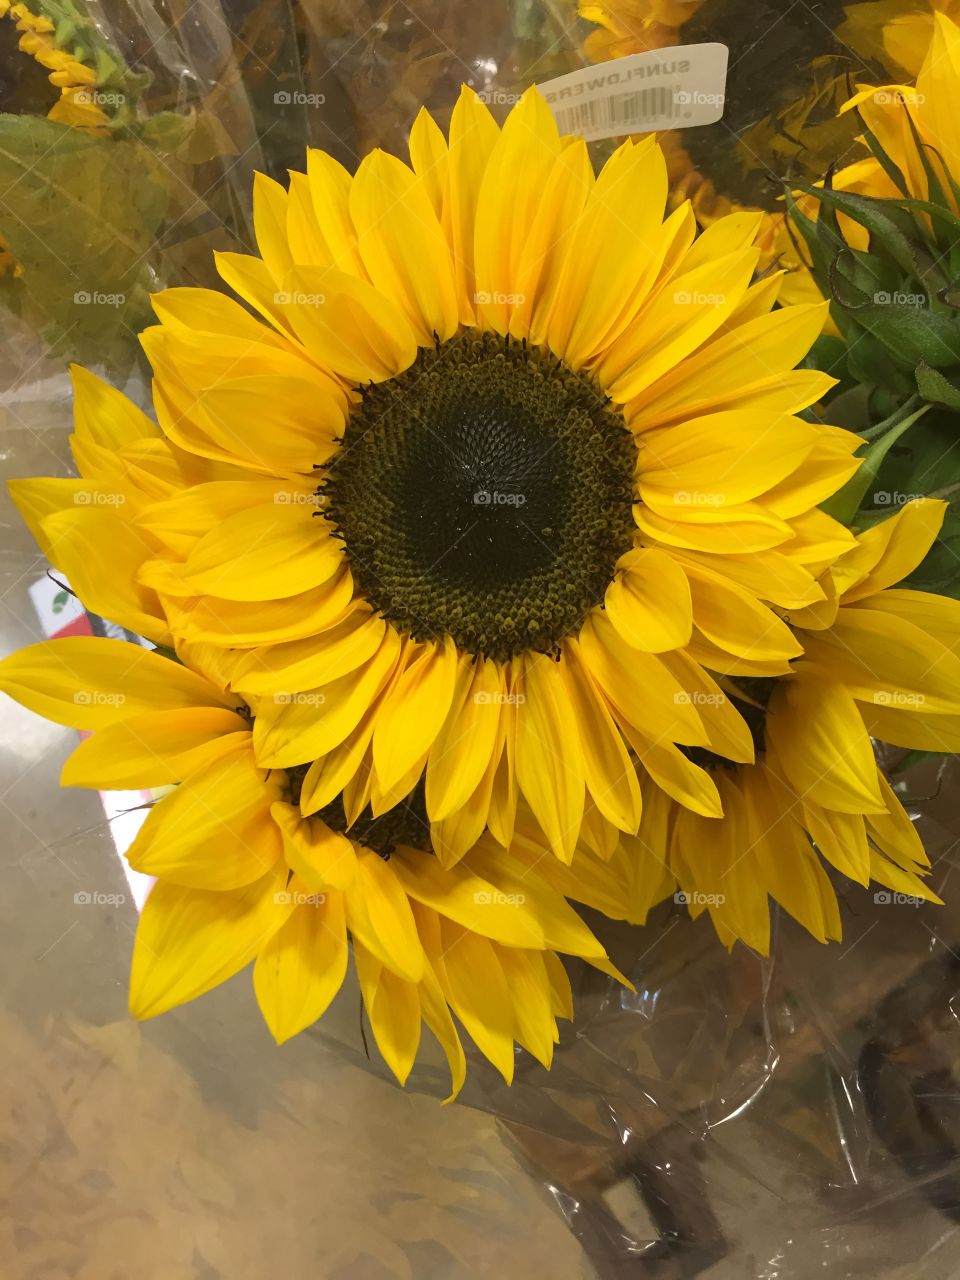 Grocery store sunflowers